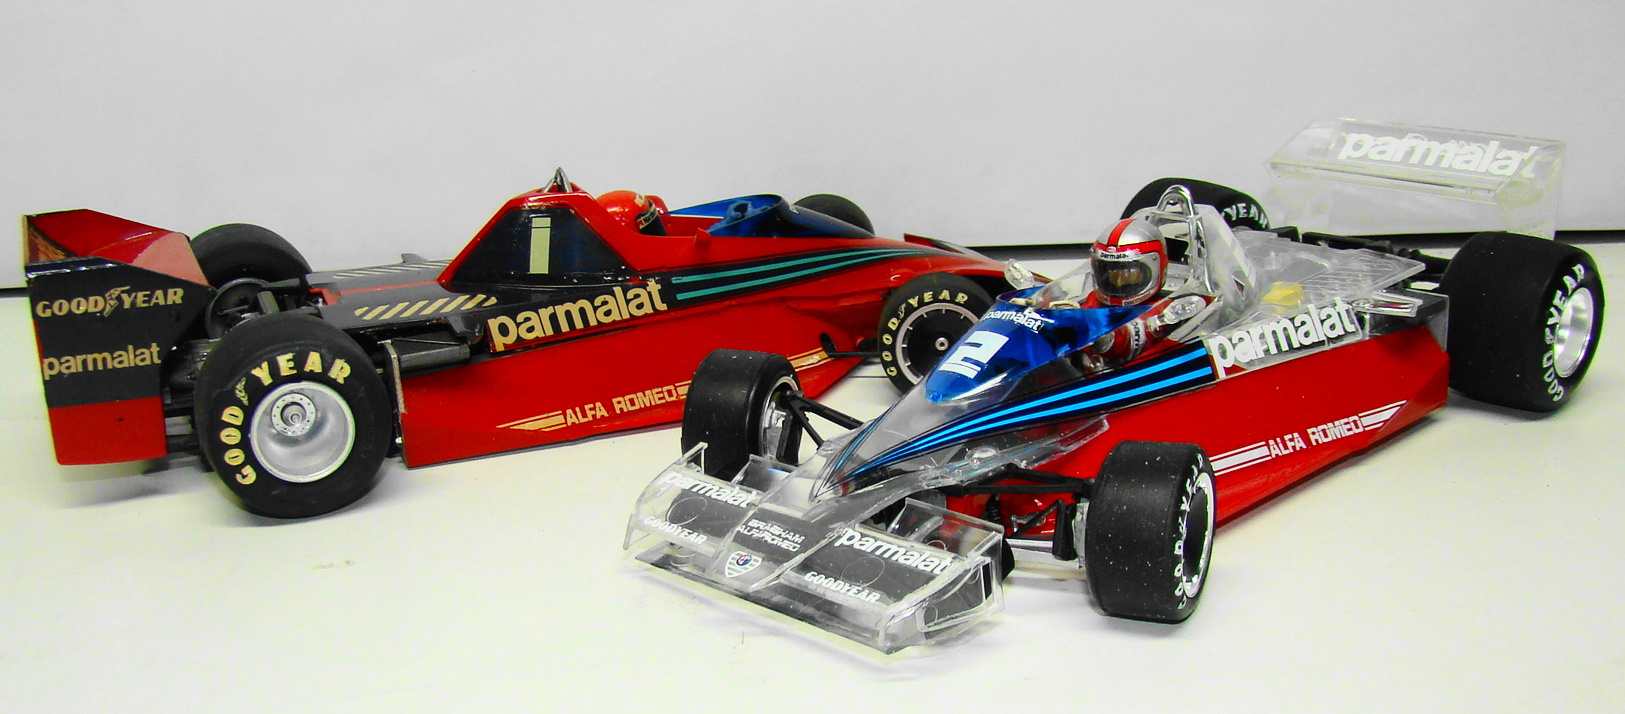 Rich Chernosky's Content - Page 63 - Model Cars Magazine Forum